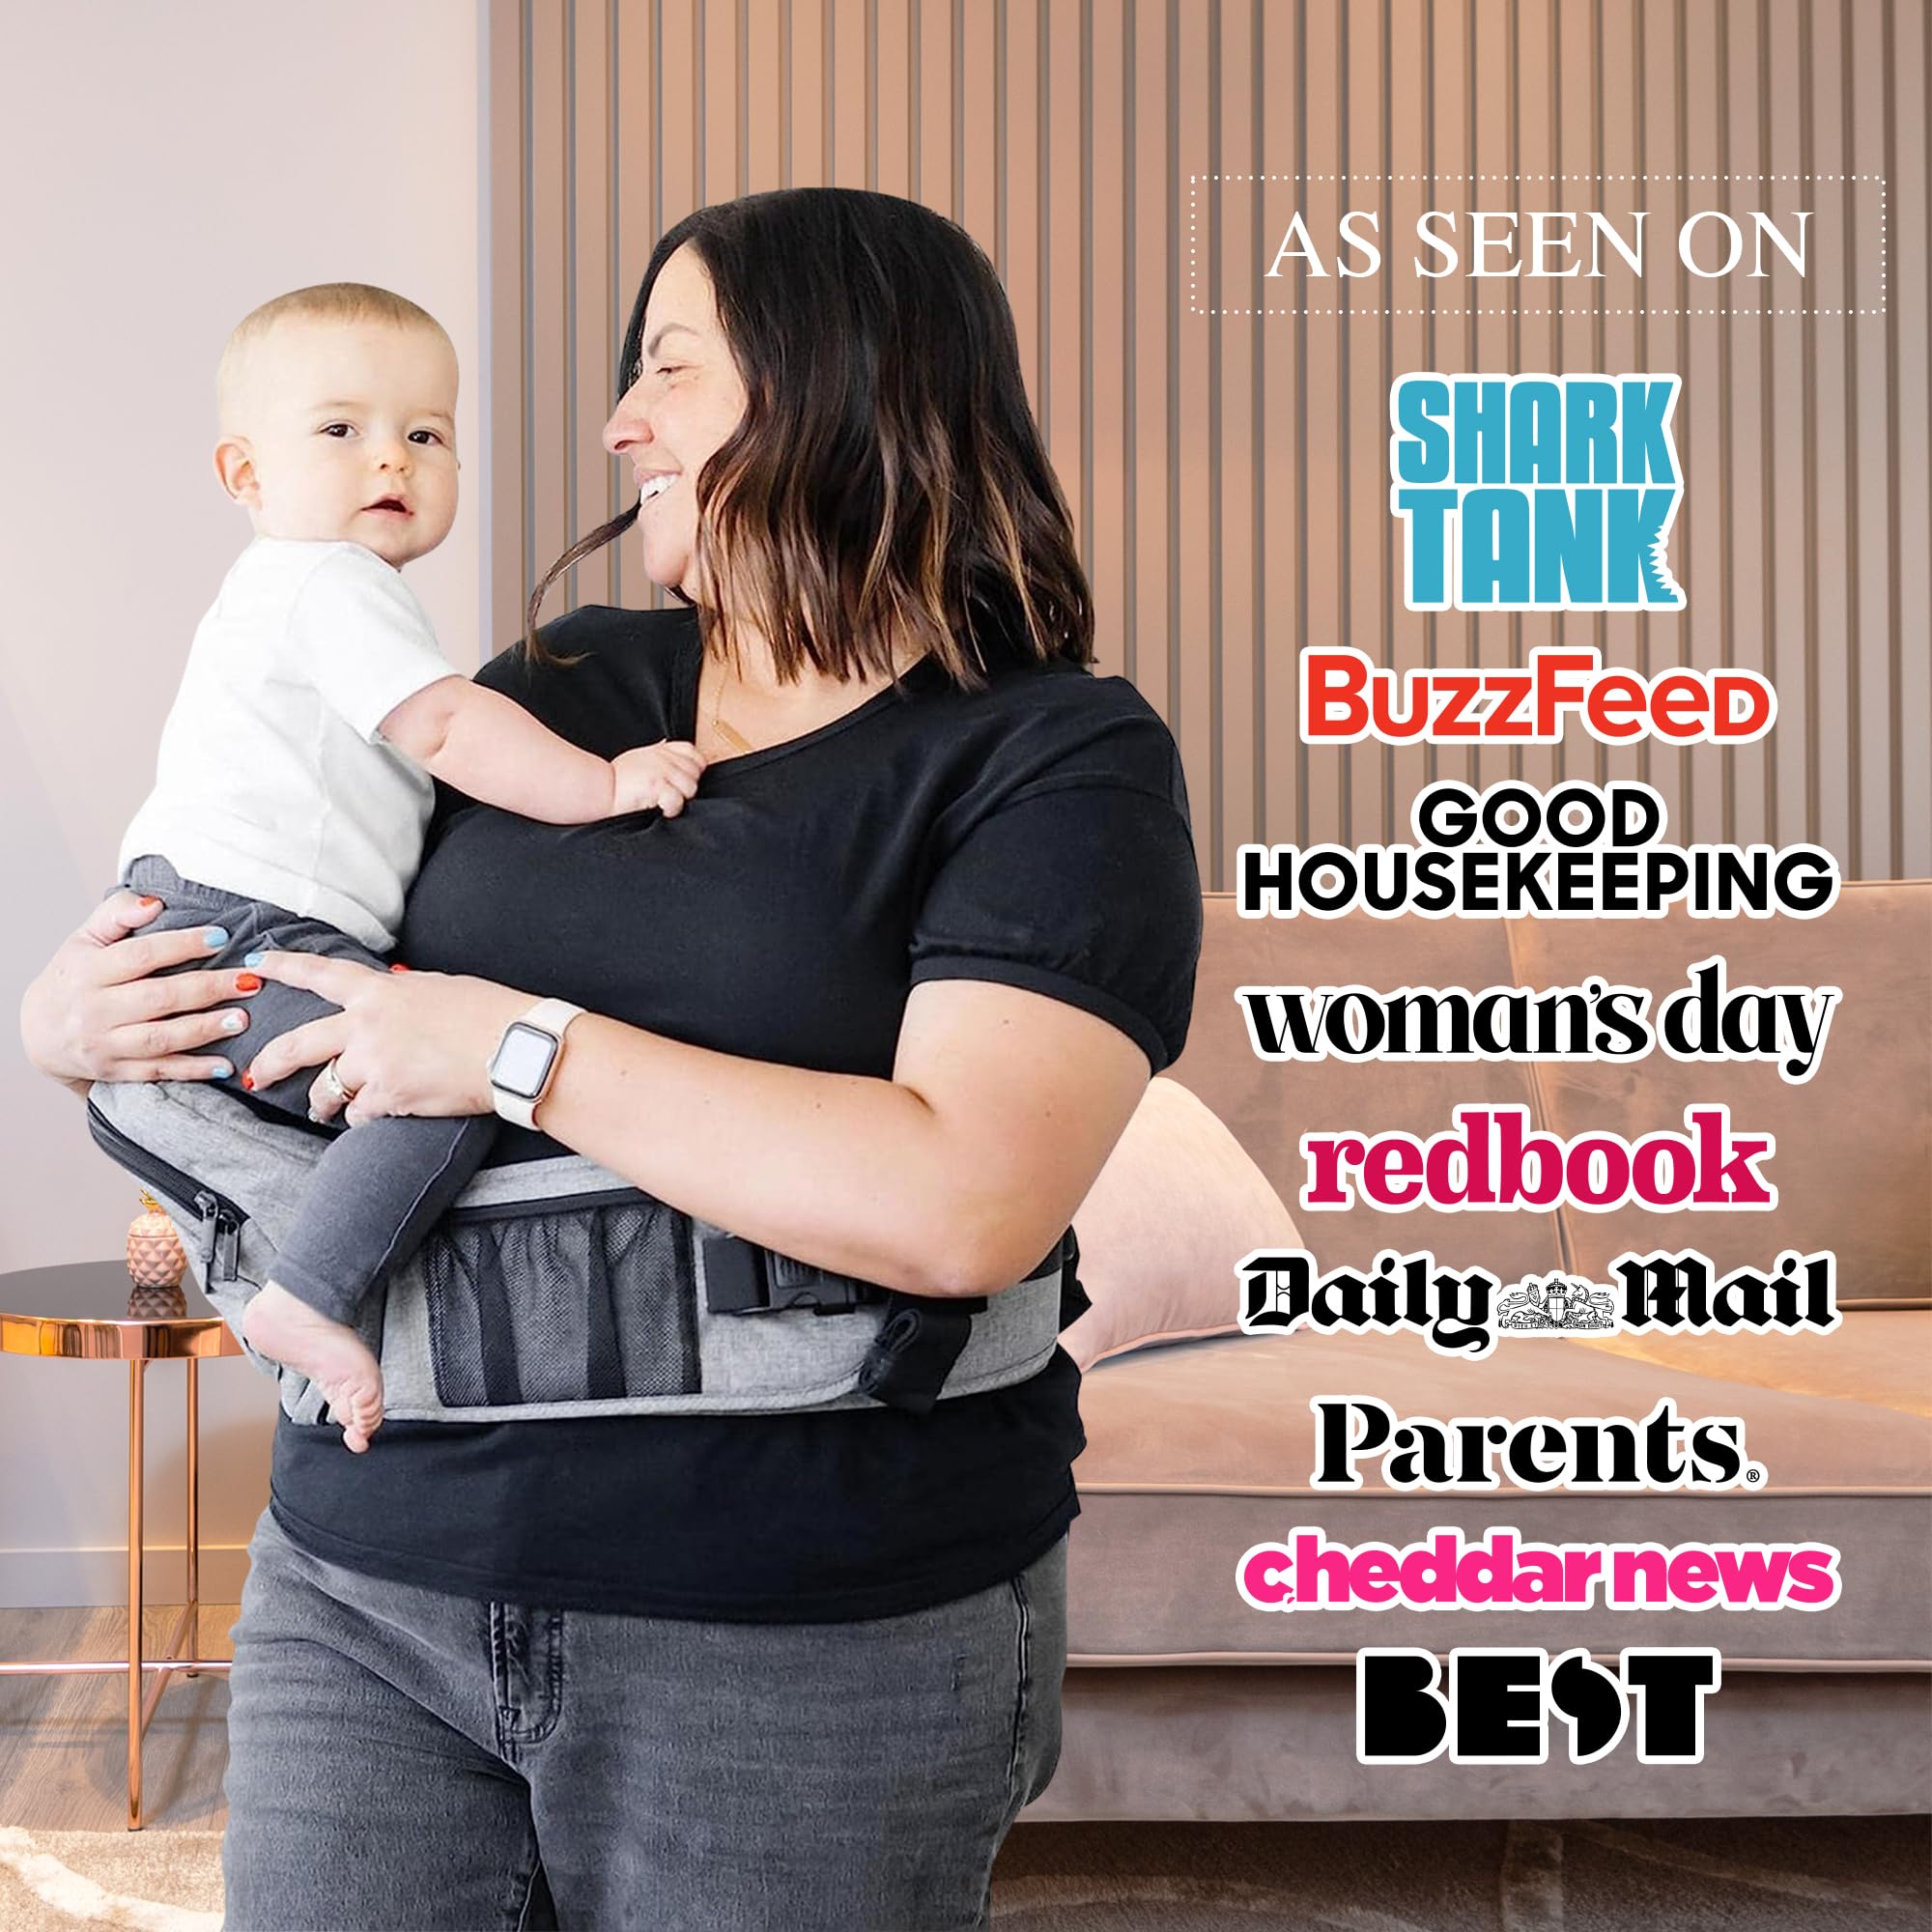 Tushbaby - Safety-Certified Hip Seat Baby Carrier - Mom’s Choice Award Winner, Seen on Shark Tank, Ergonomic Carrier & Extenders for Newborns & Toddlers (Carrier, Grey)